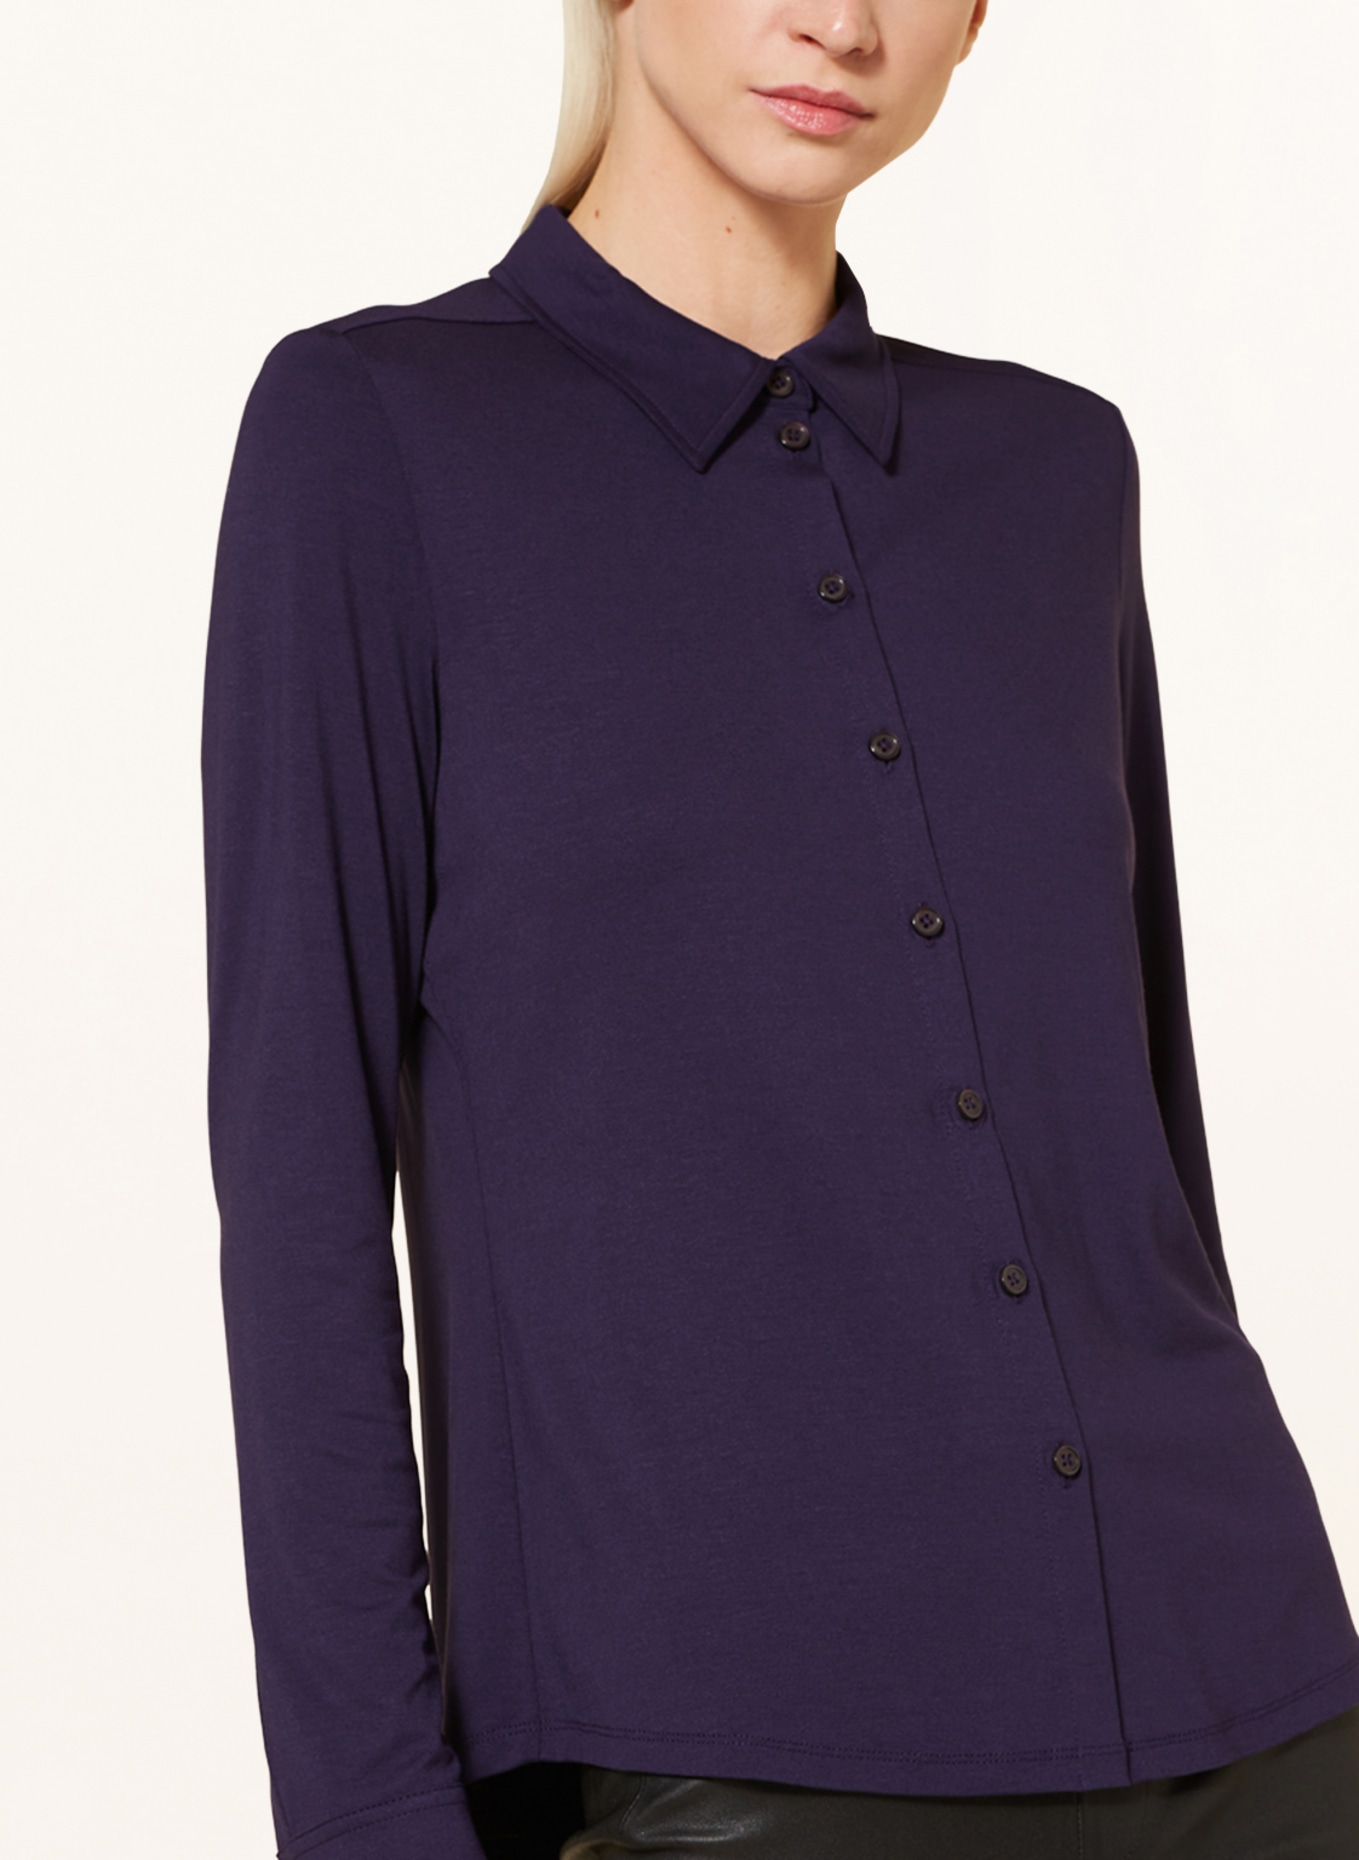 Marc O'Polo Shirt blouse made of jersey, Color: DARK PURPLE (Image 4)